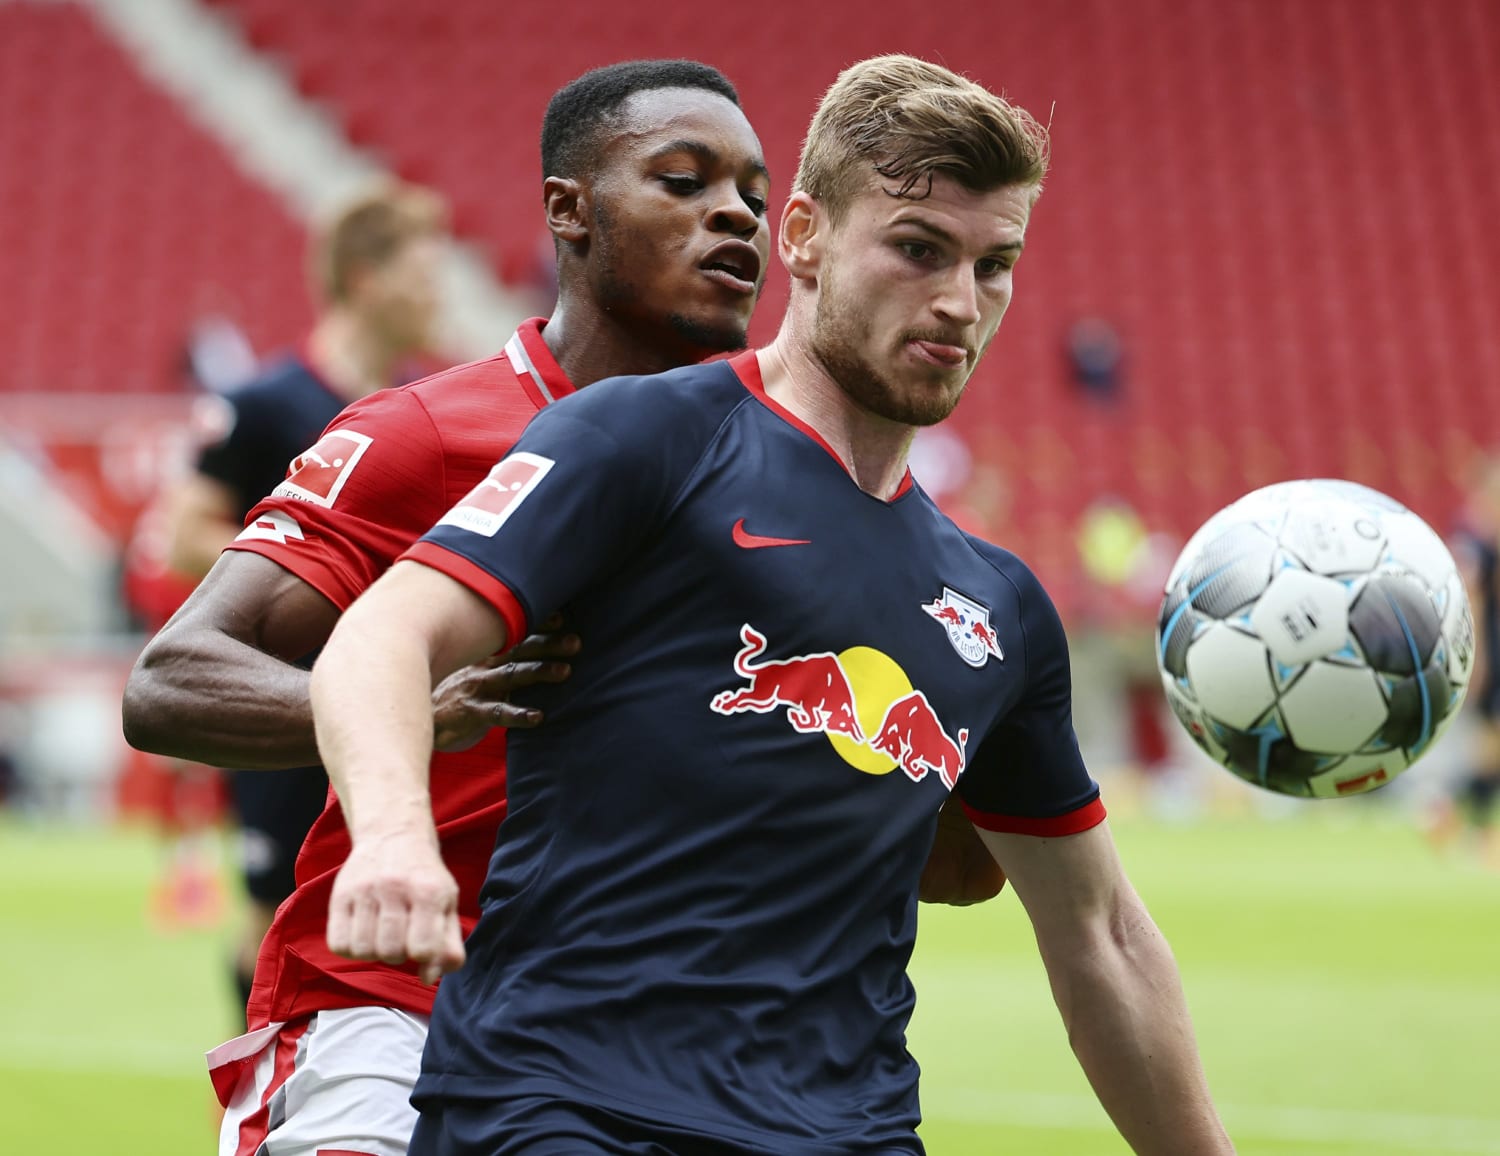 Germany striker Werner close to joining Chelsea from Leipzig